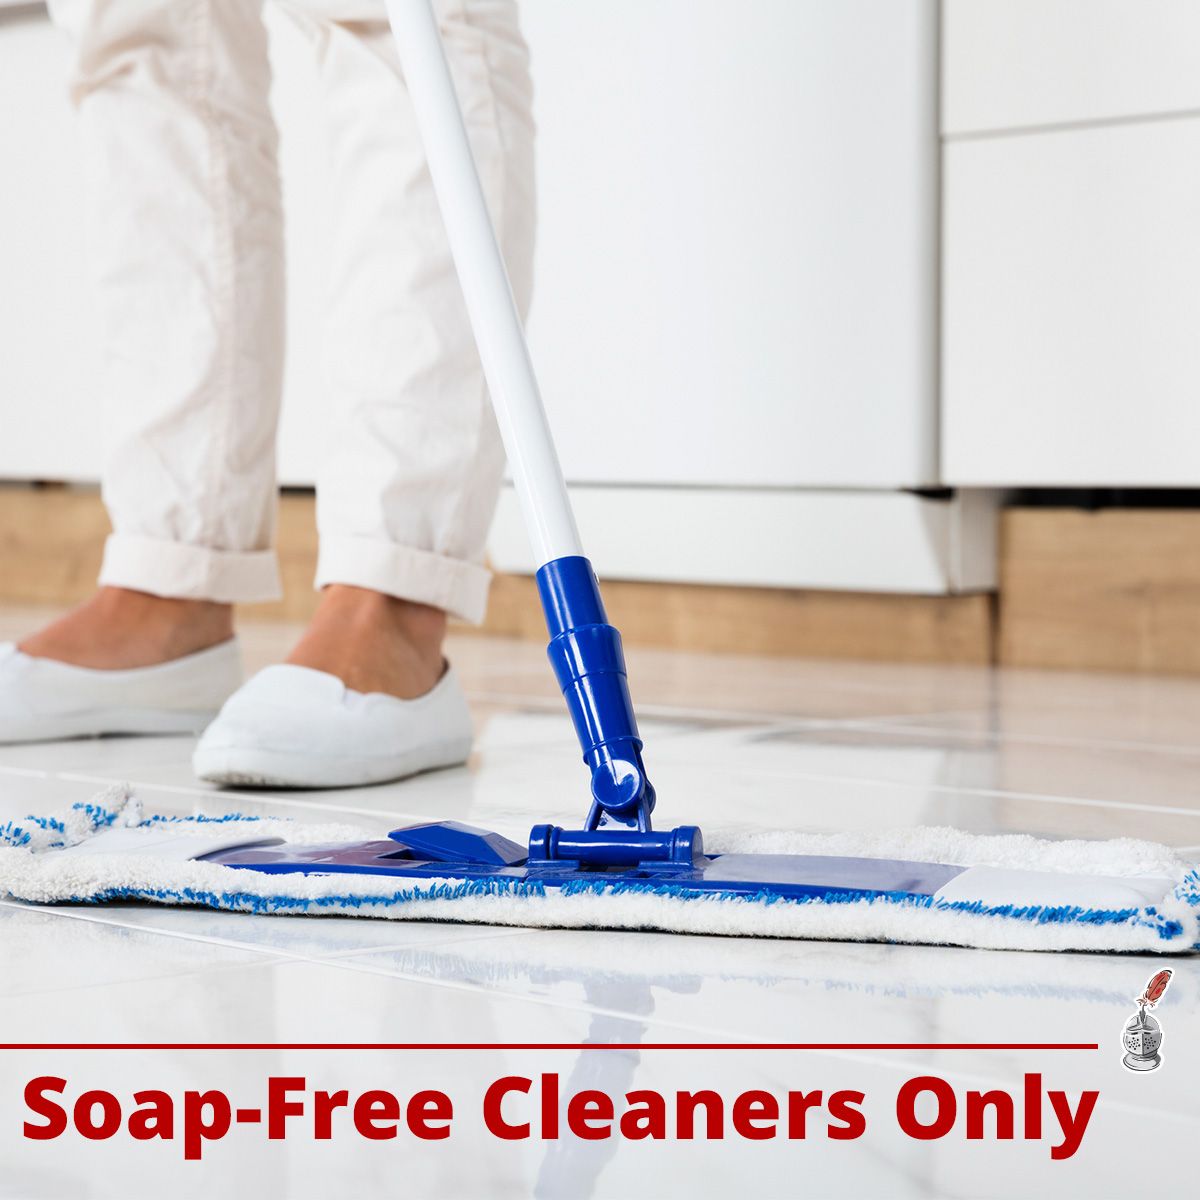 Soap-Free Cleaners Only